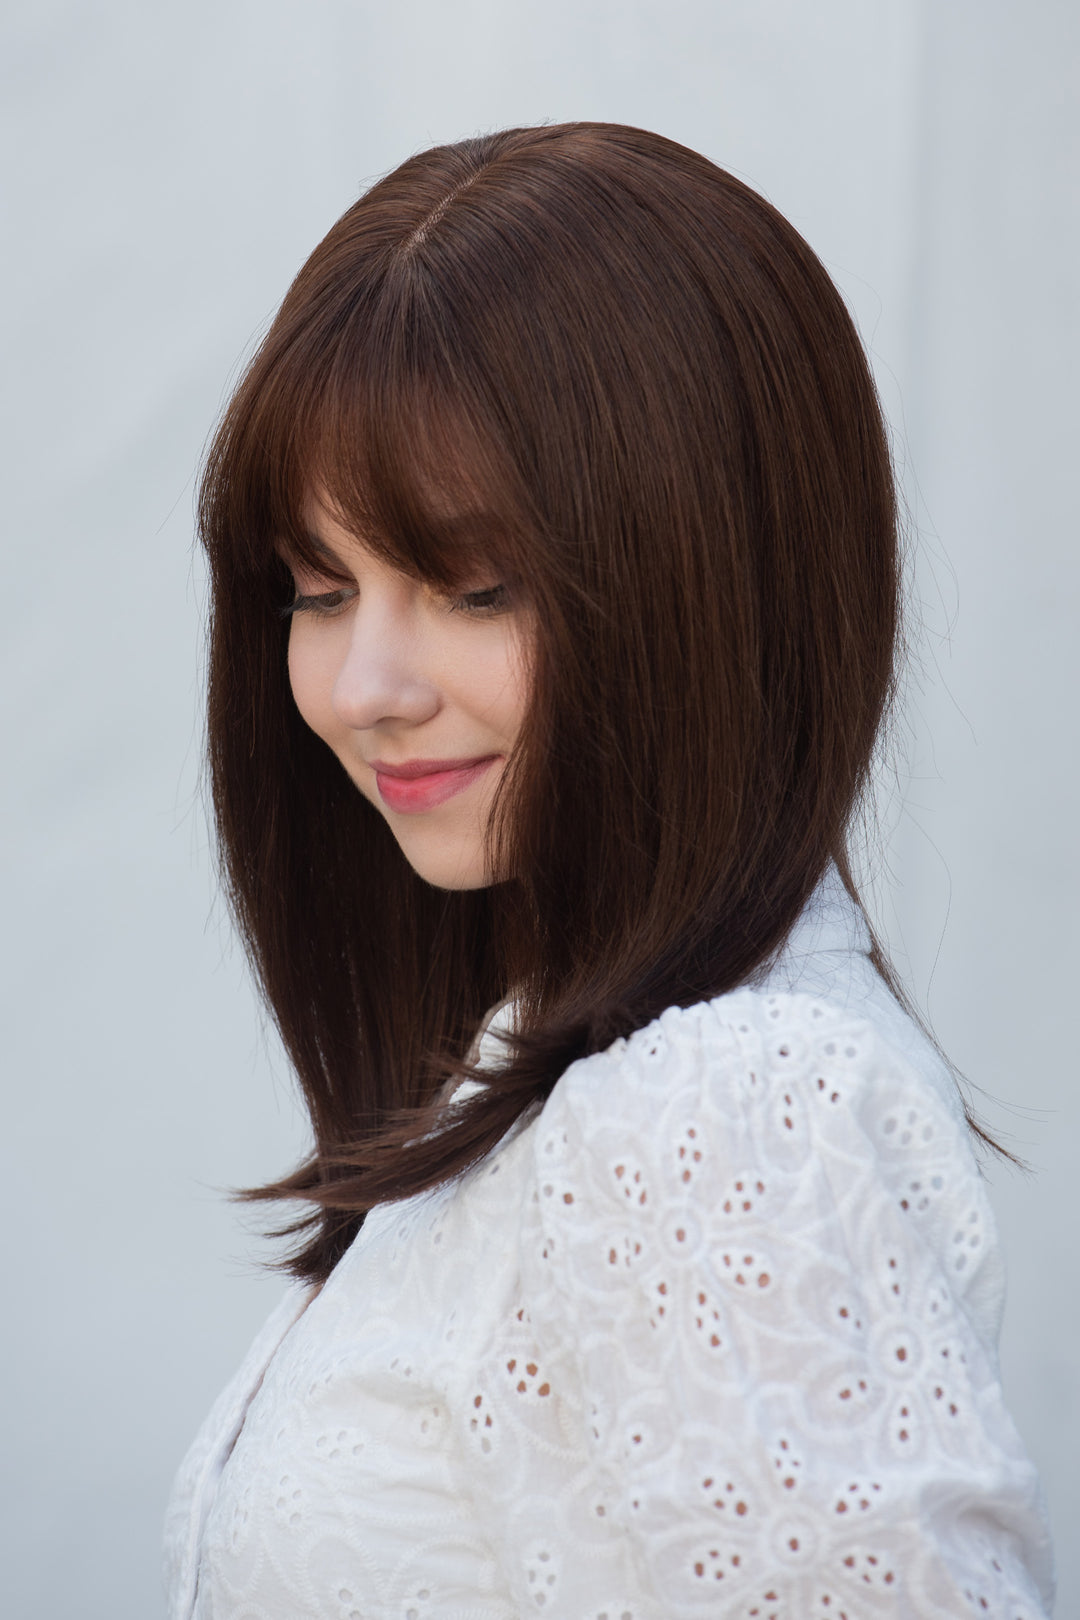 Straight Long Bob Cut Wig Natural Brown Brunette Wig with Bangs